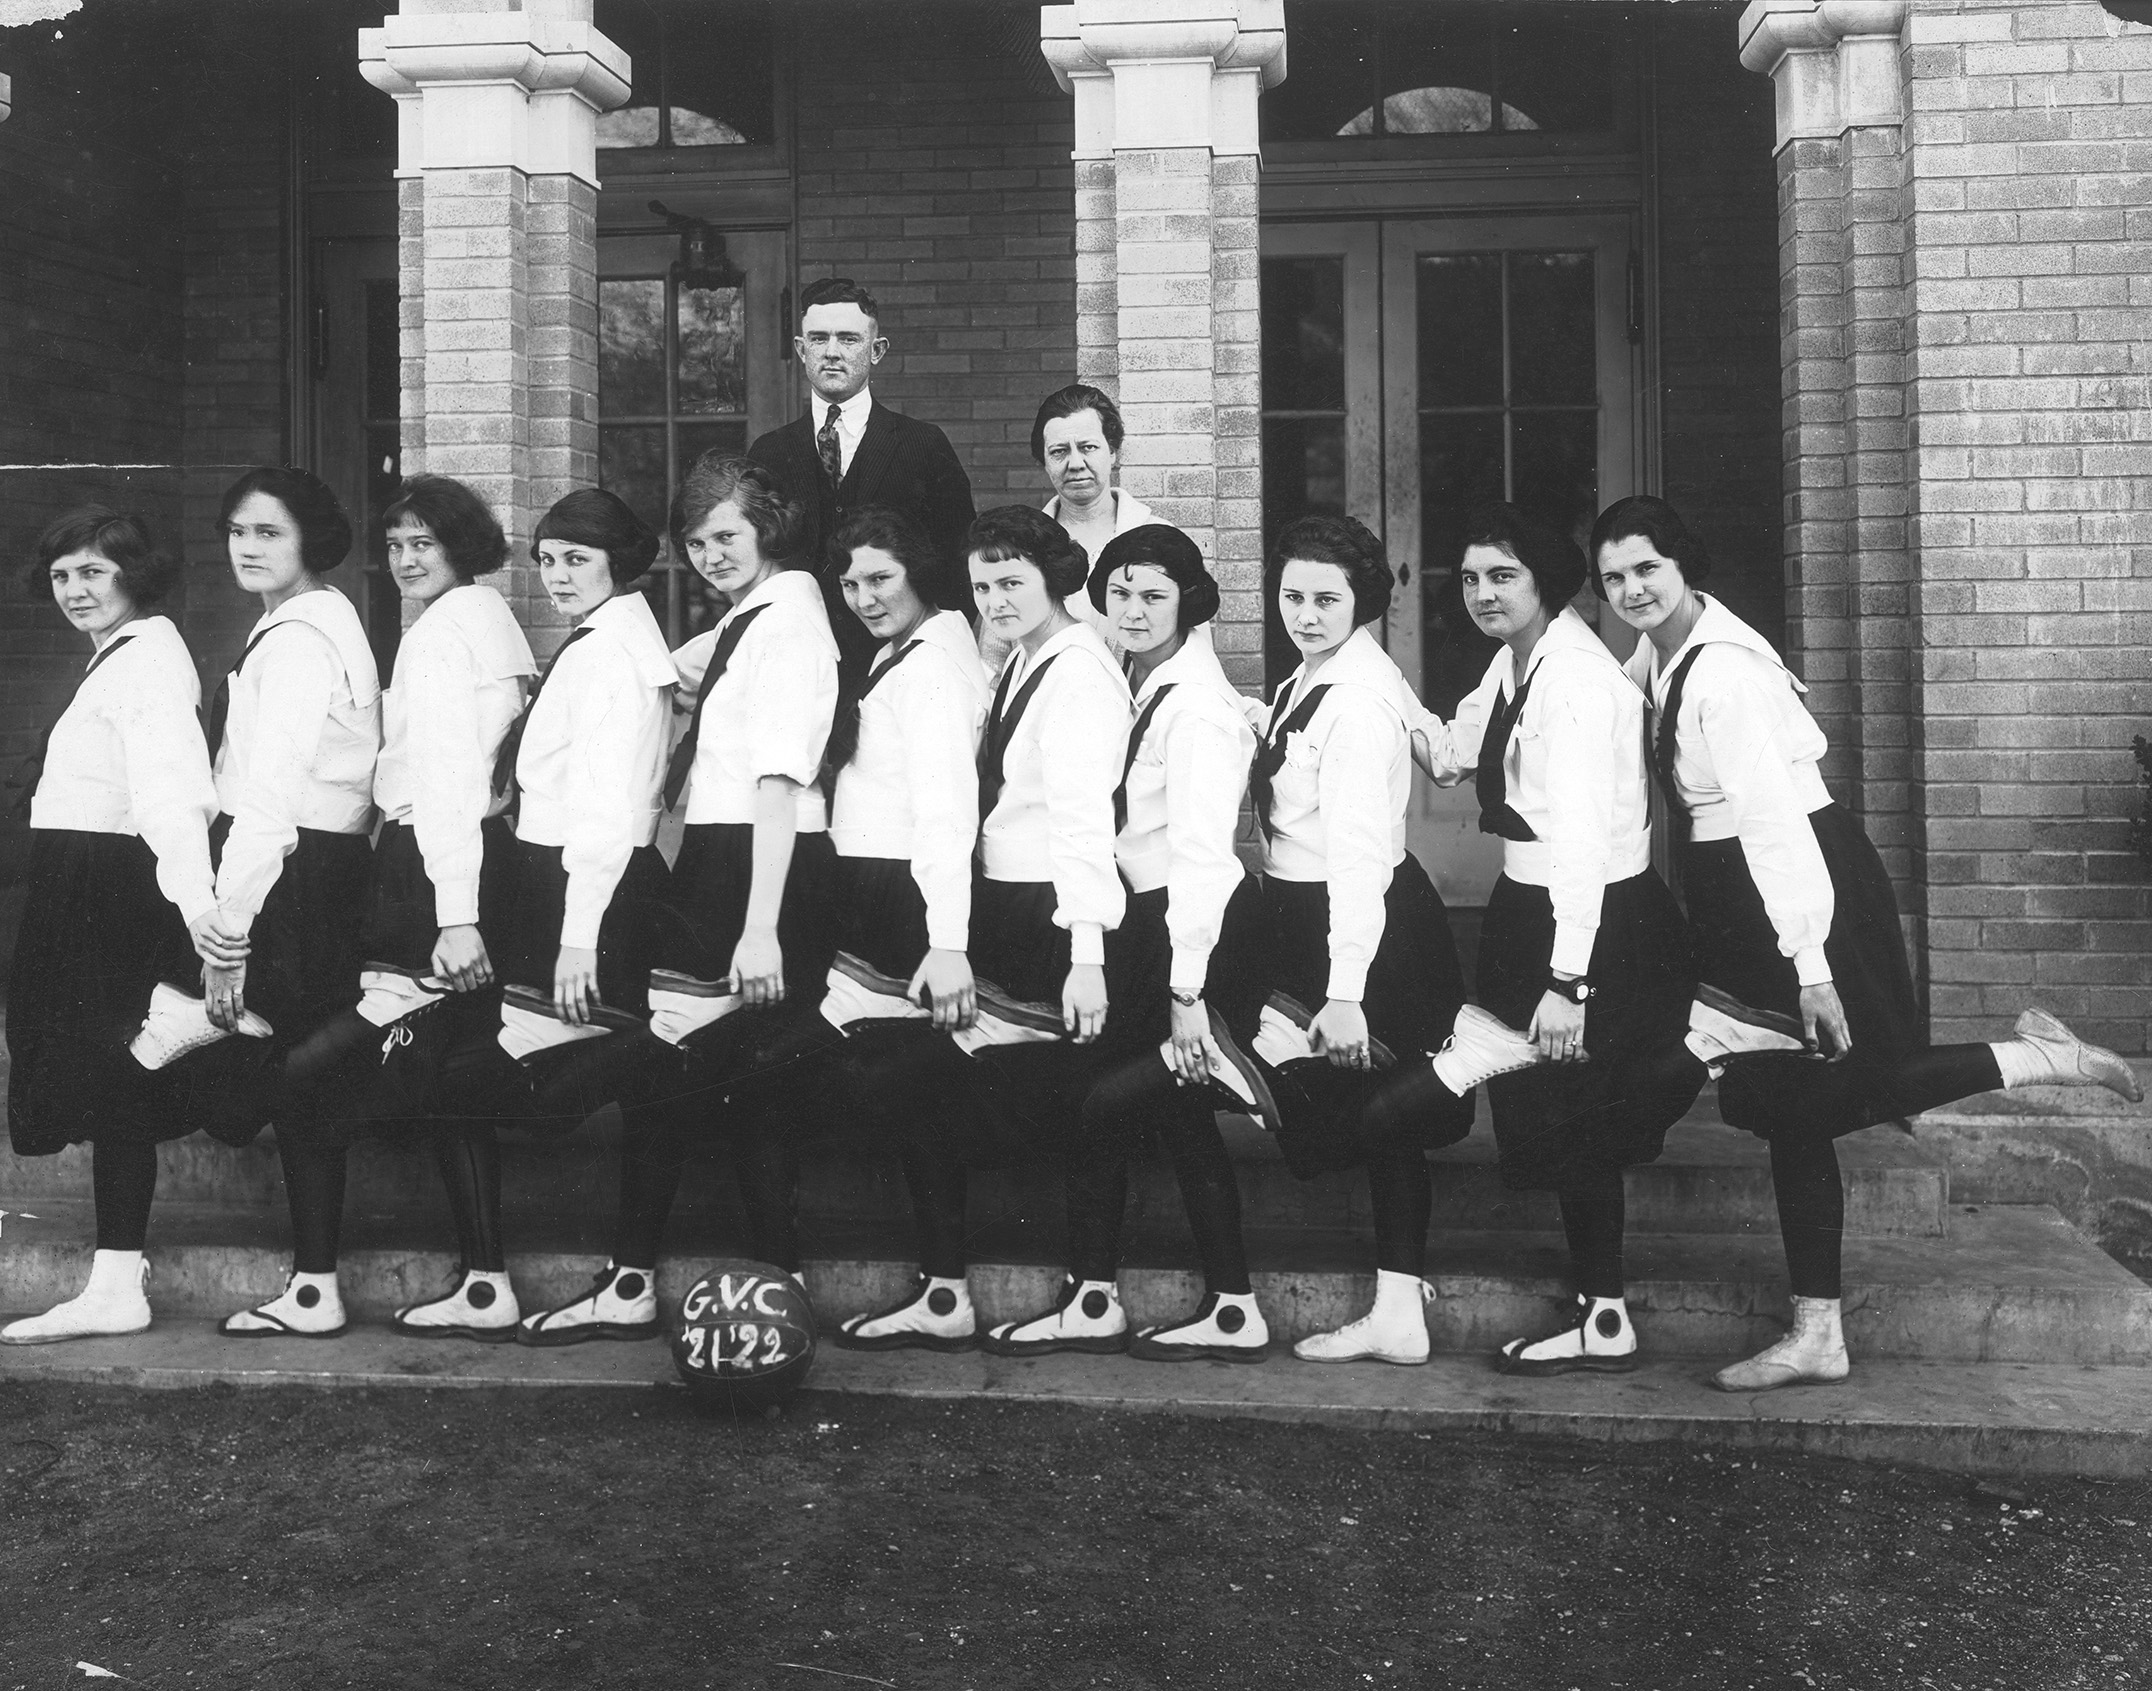 Black and white photo of a group portrait of women on a basketball team, each posed holding the left foot of their teammate. There are a man and woman standing behind the group.